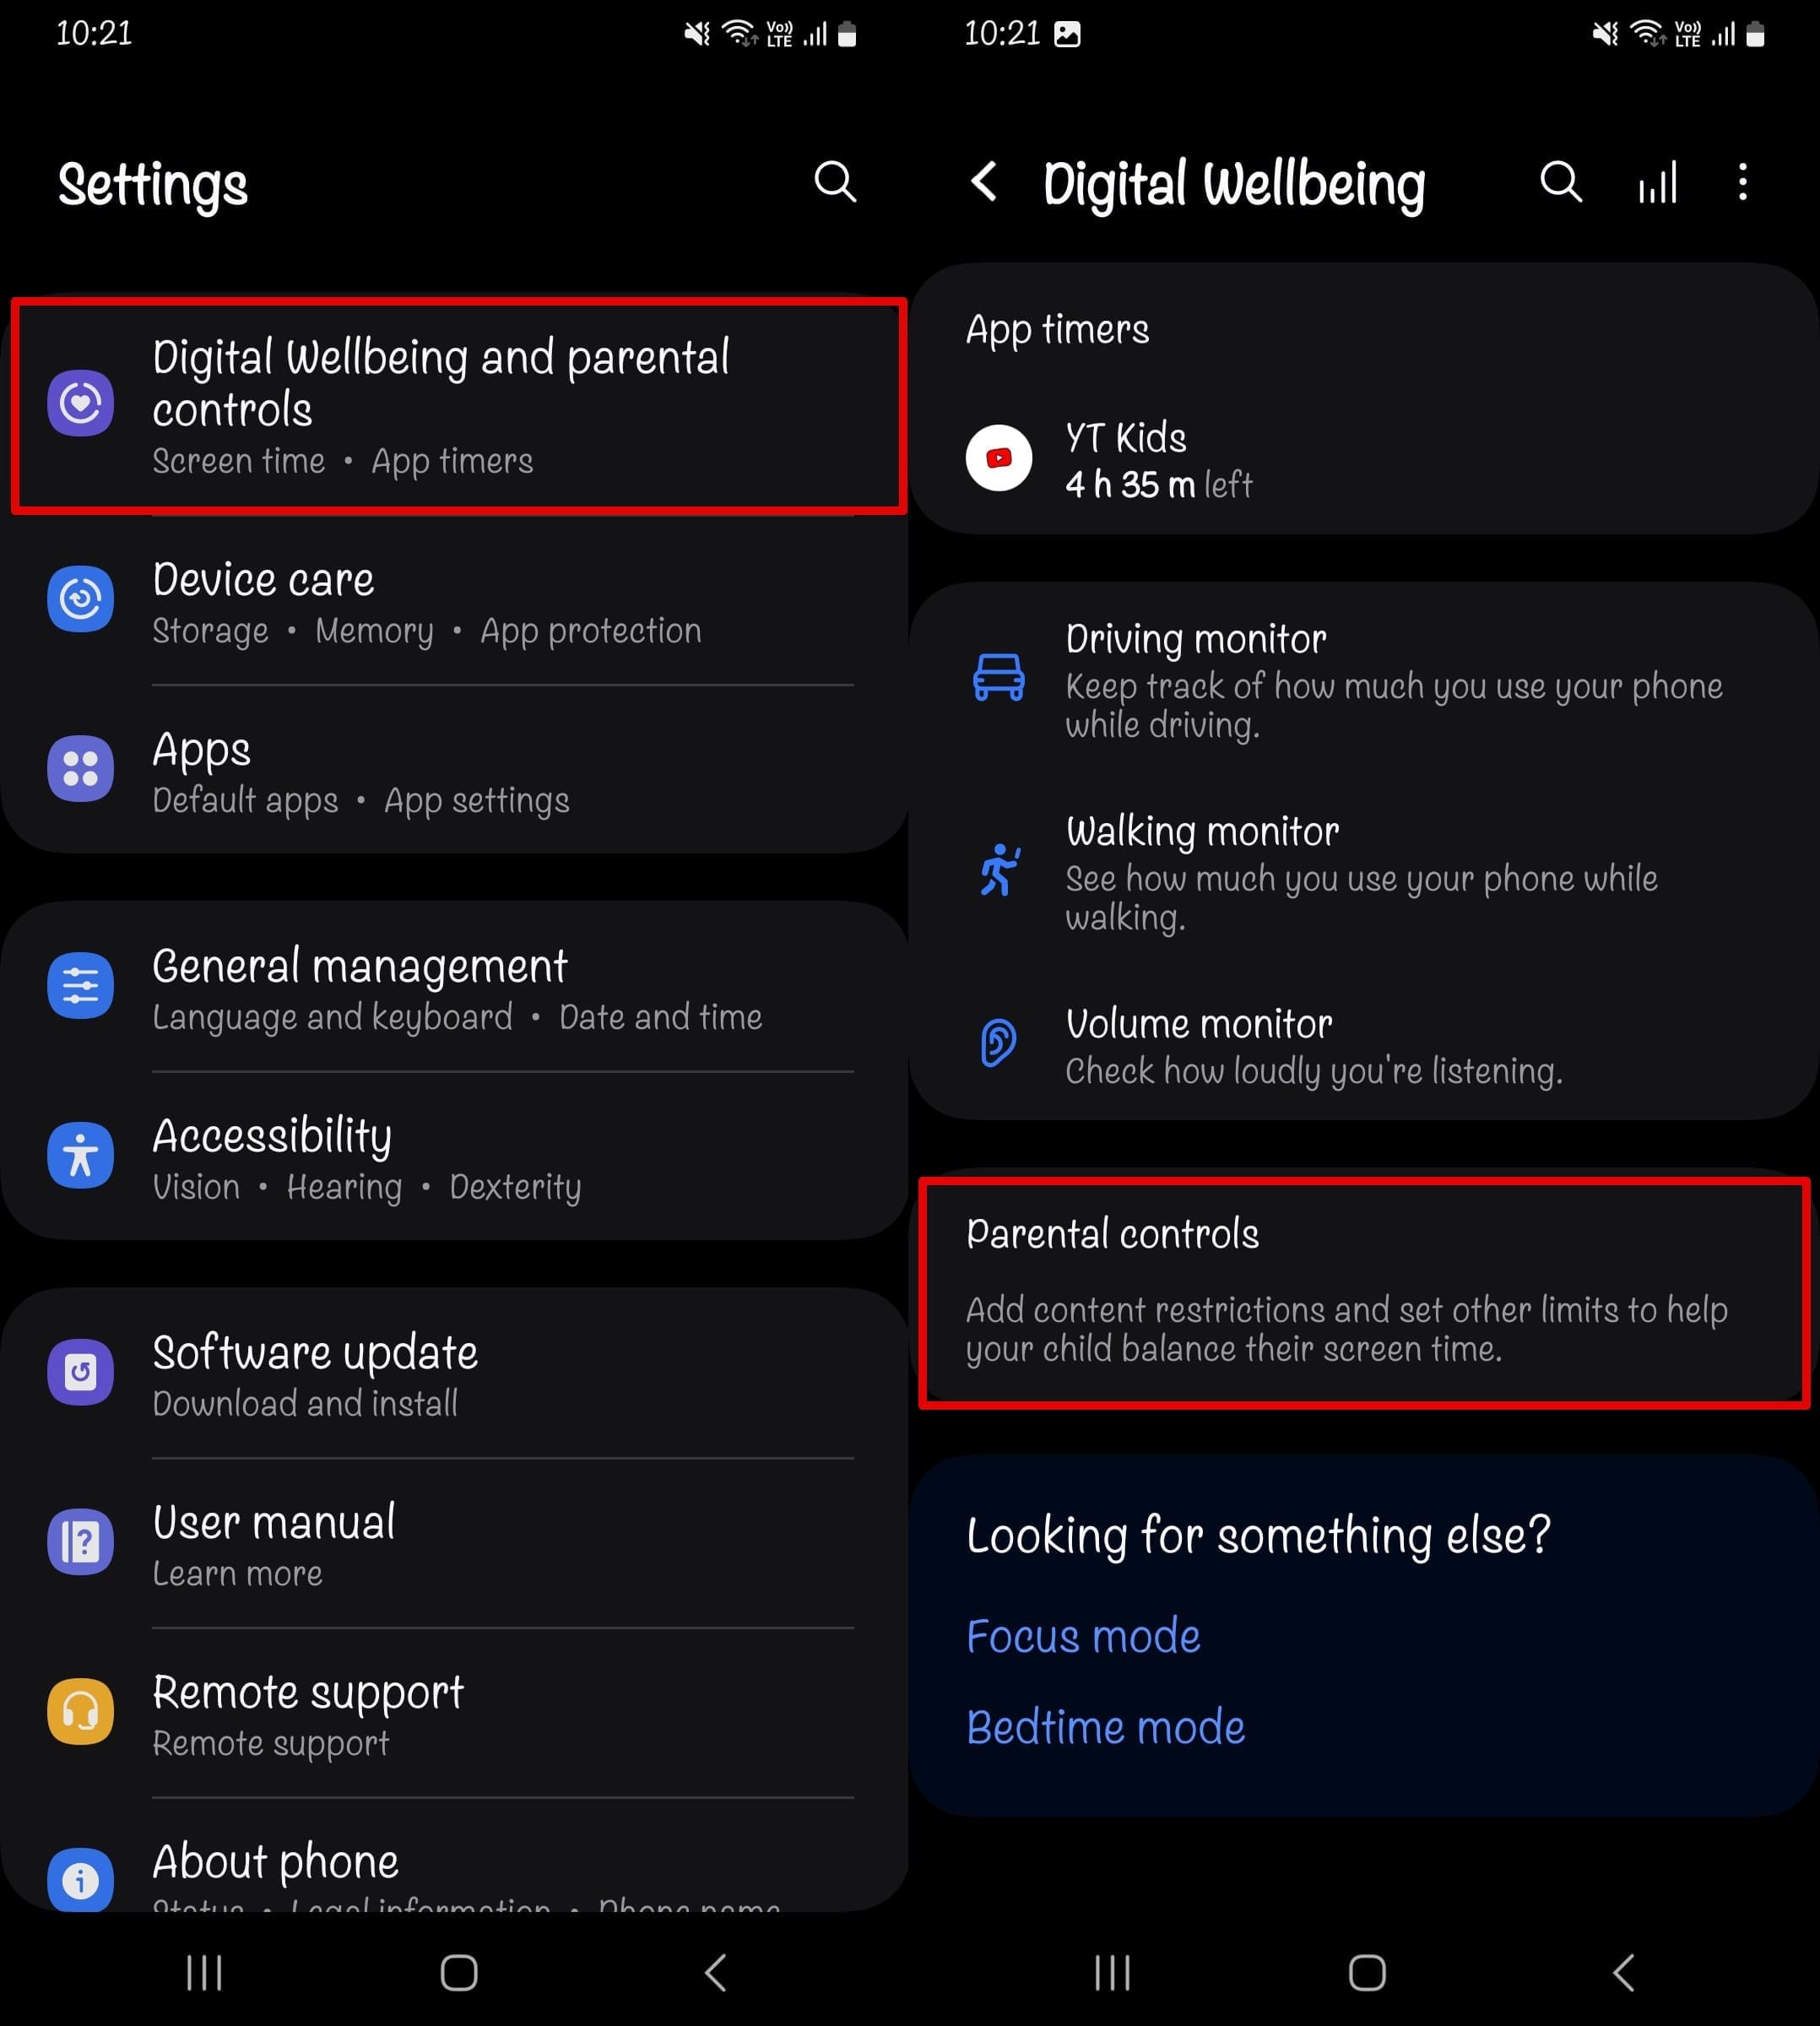 An image of accessing digital wellbeing on Android phone